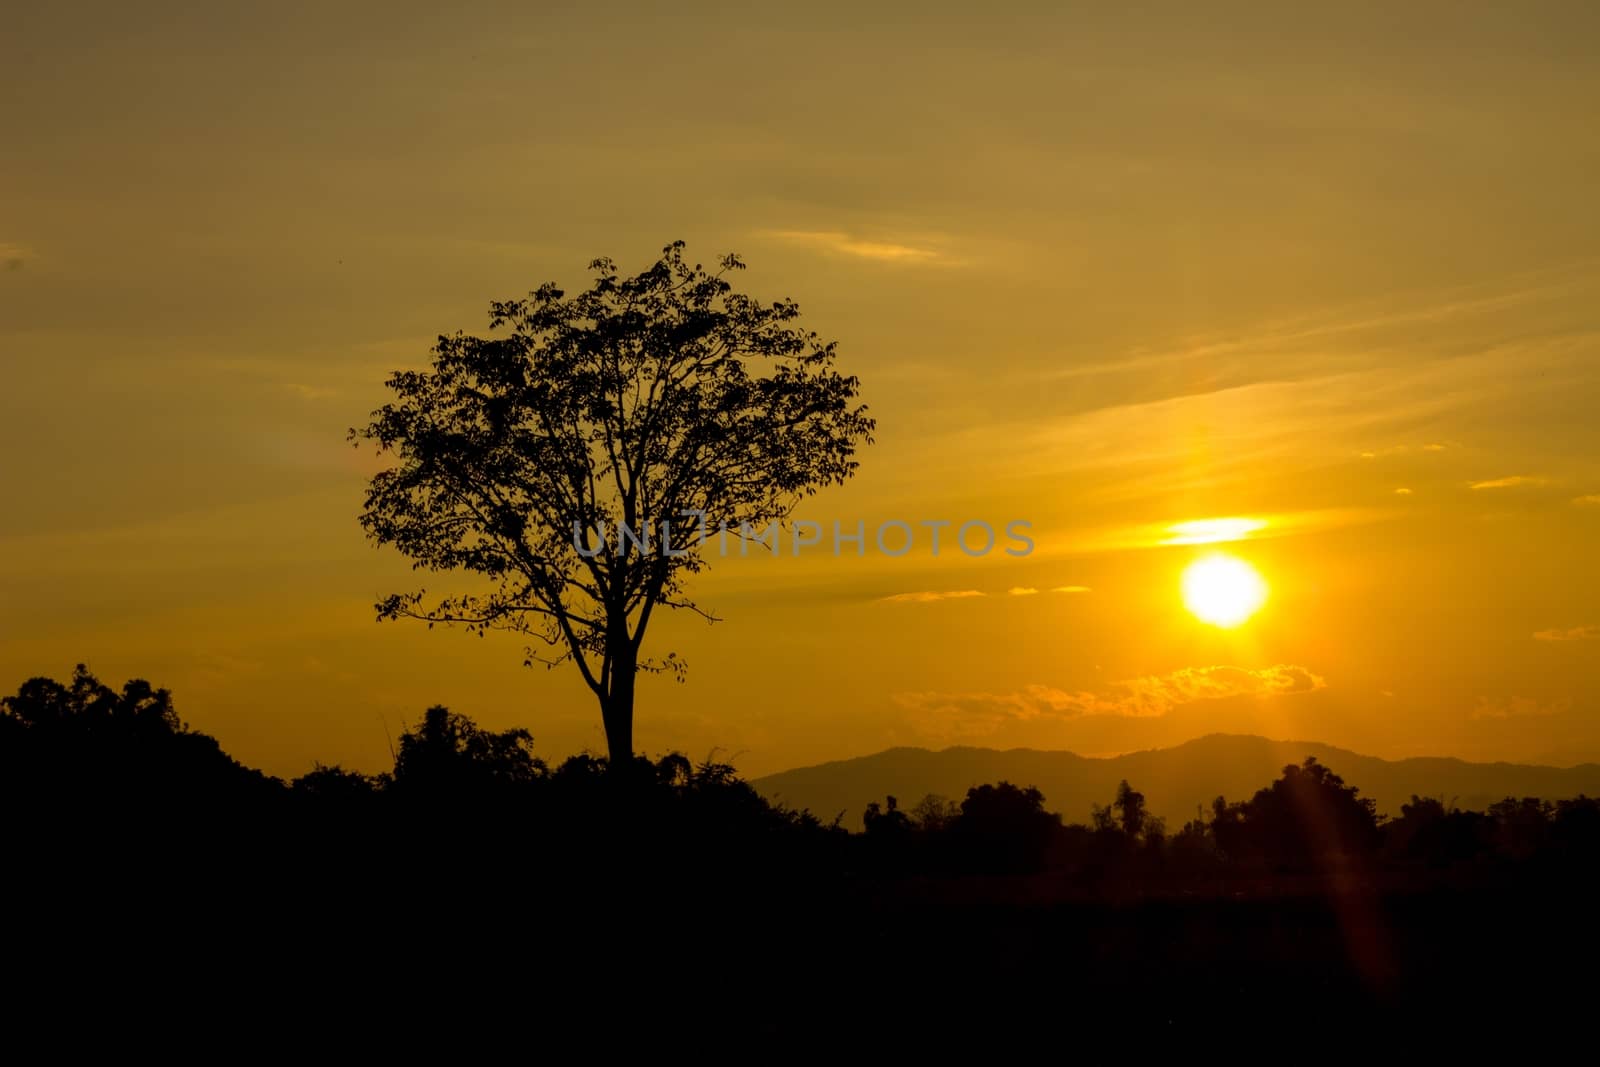 Beautiful landscape image with sun and trees silhouette at sunset.